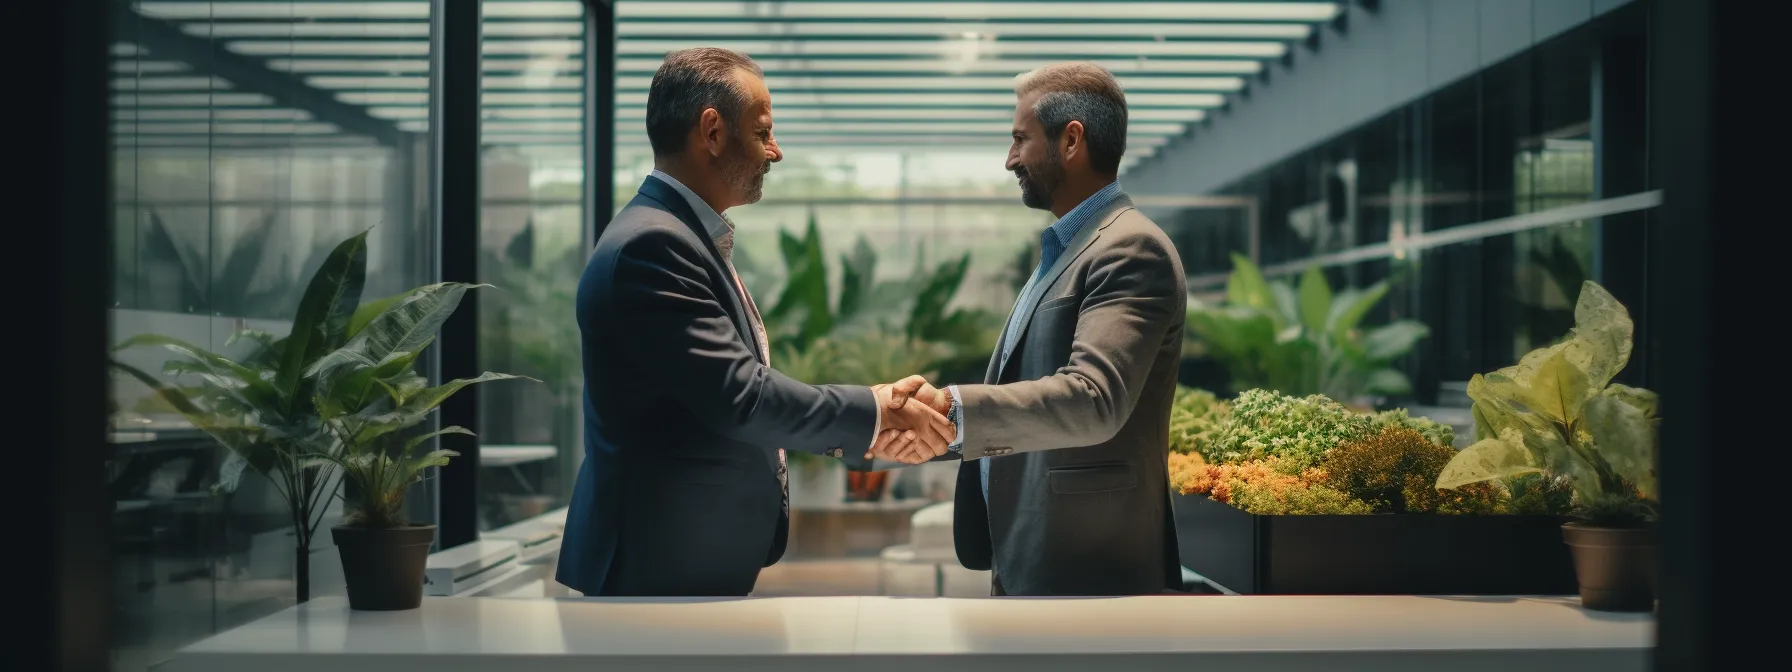 two individuals shaking hands and exchanging business cards in a professional setting.